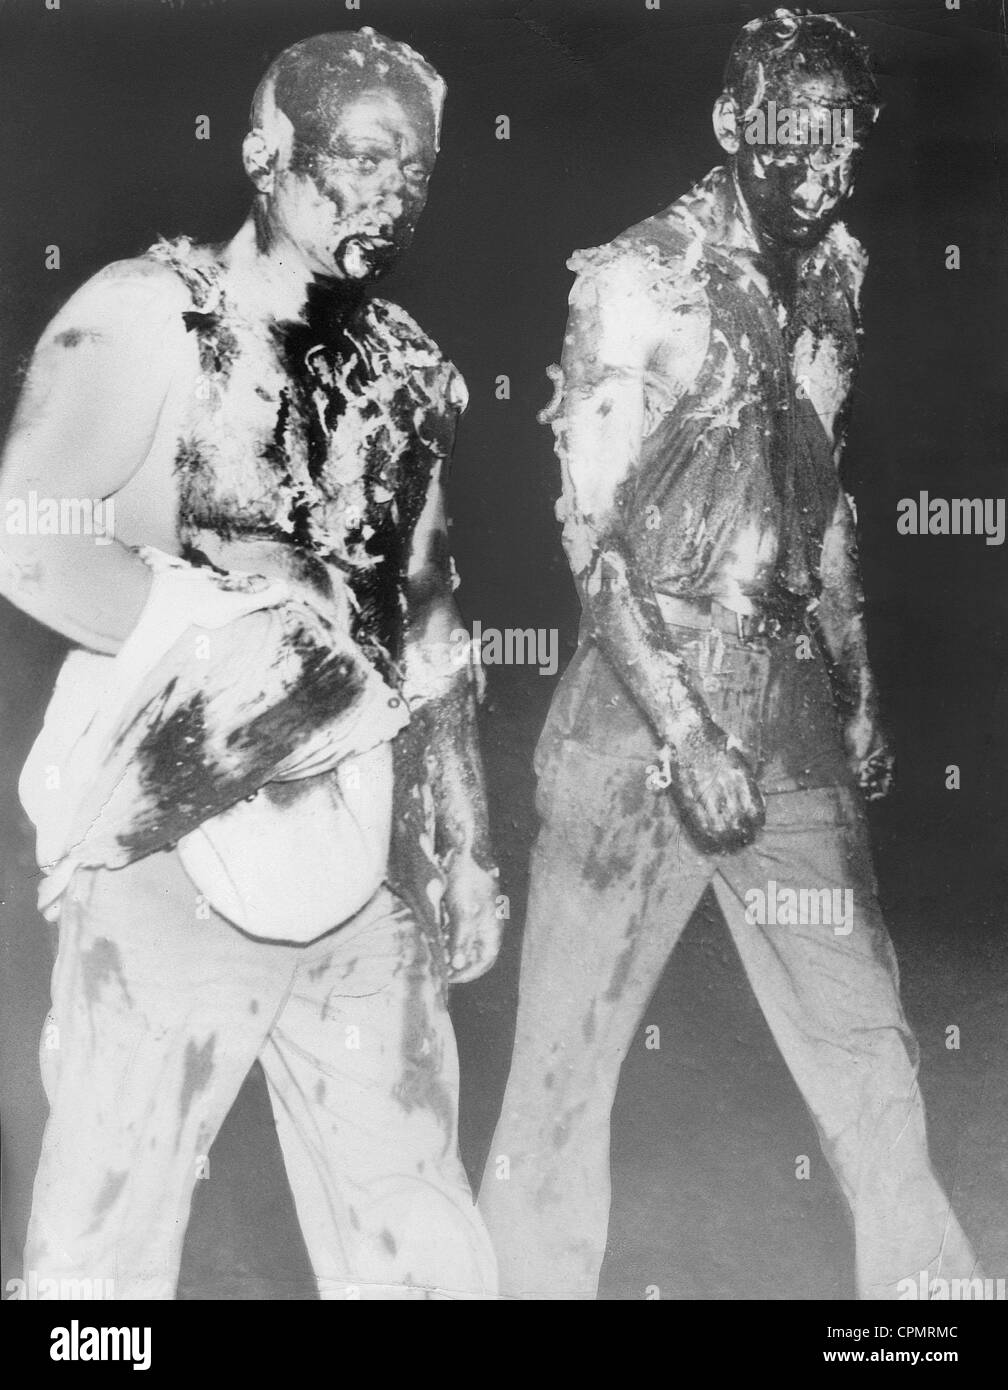 Tarred and feathered Communists in Santa Rosa, 1935 Stock Photo